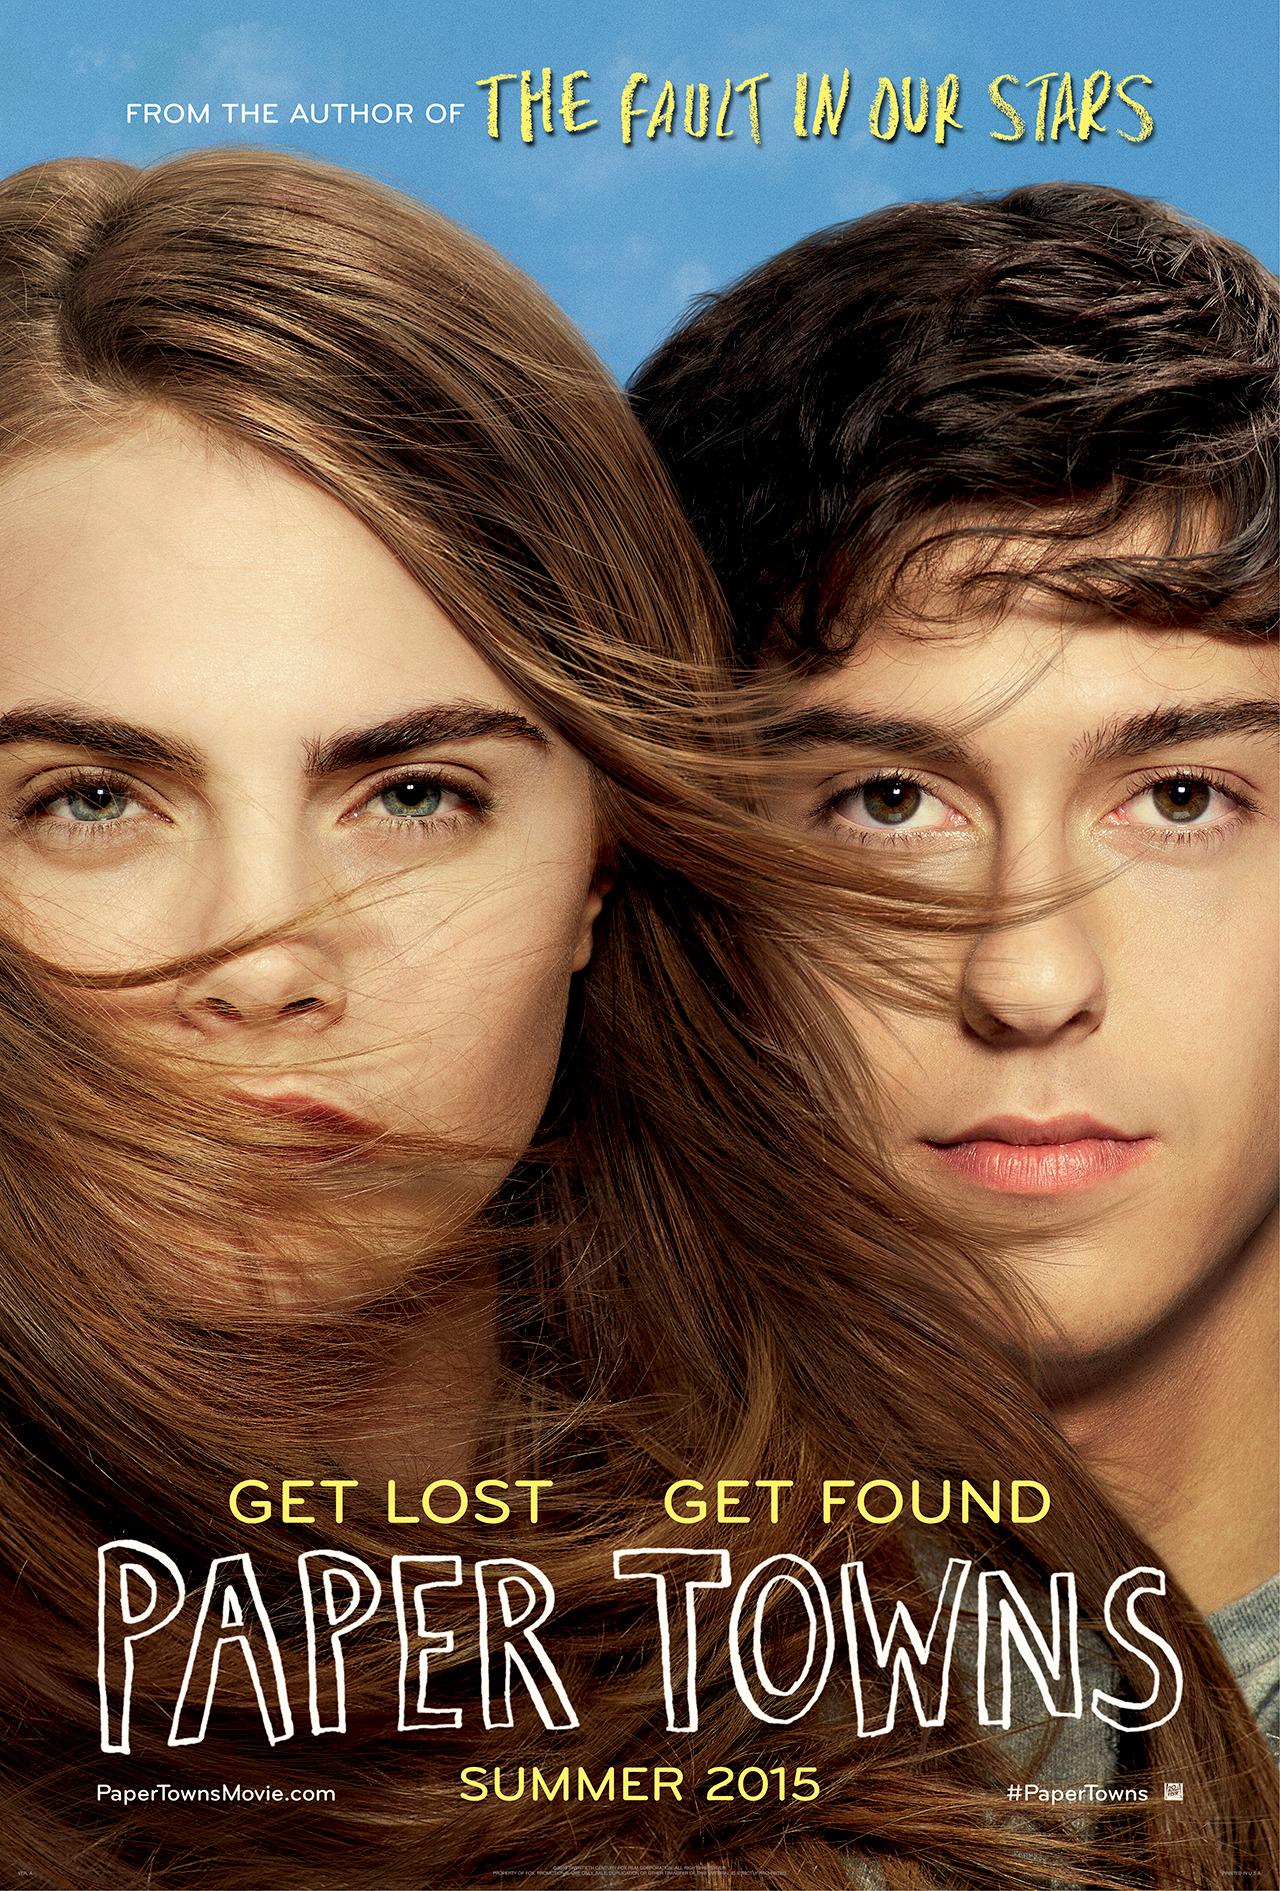 Paper Towns (2015) | from The Author of The Fault in Our Stars